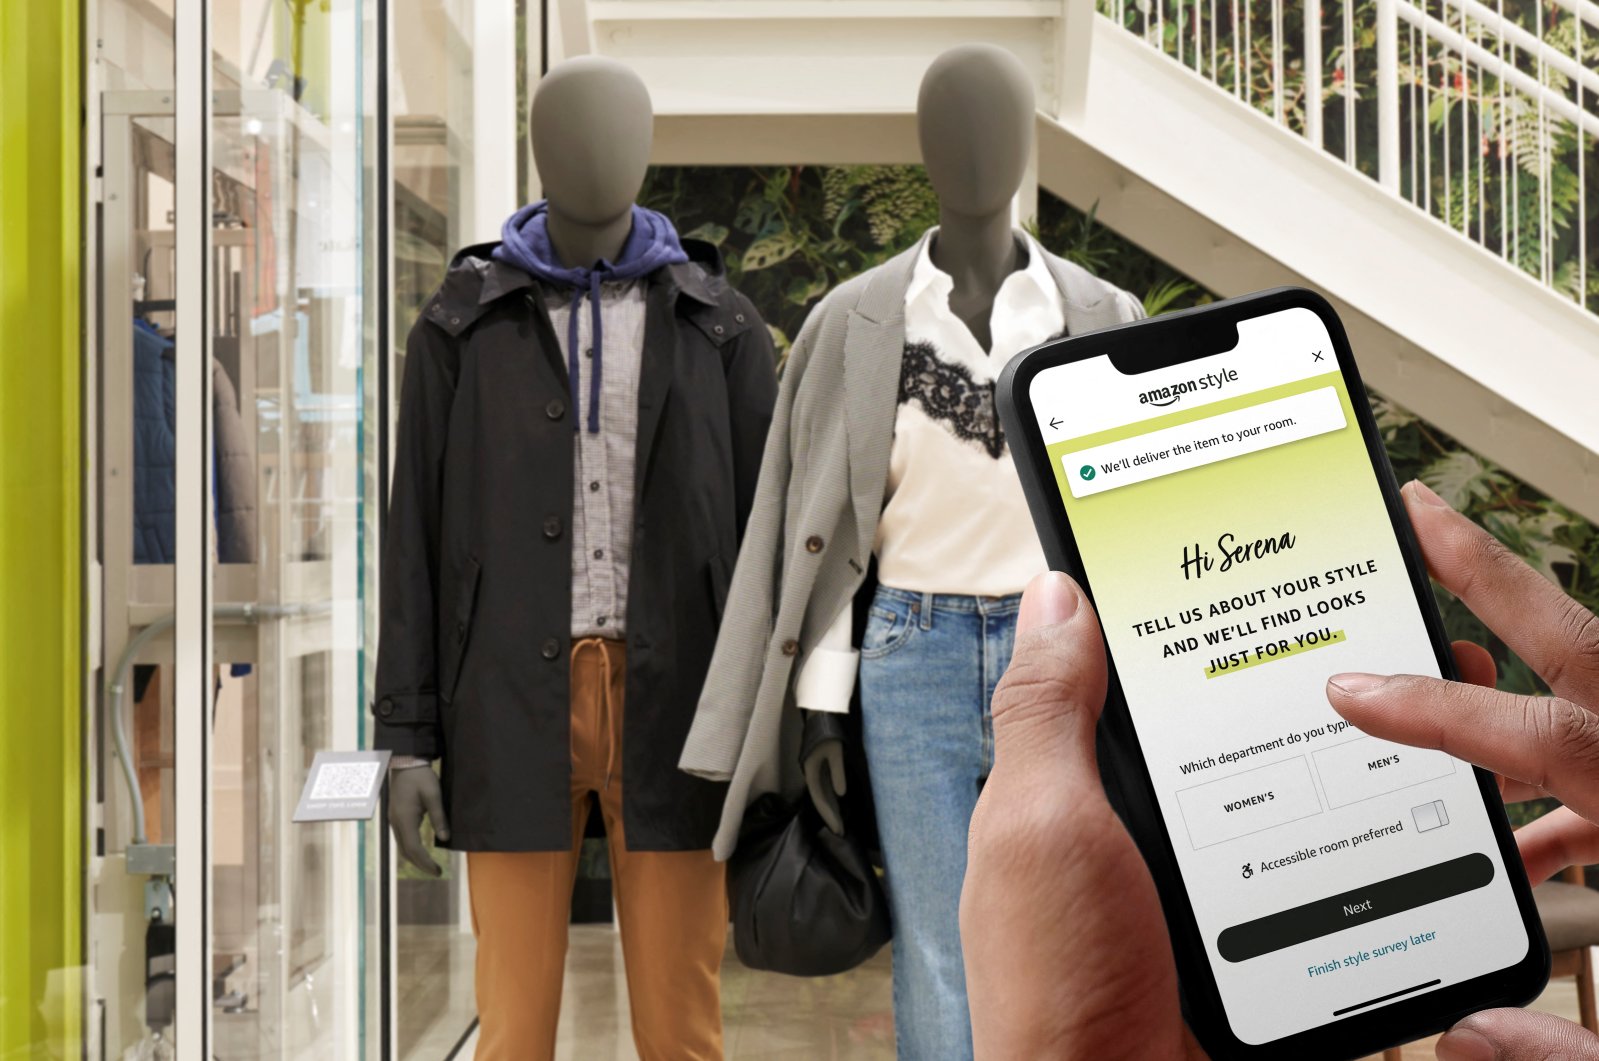 Amazon&#039;s upcoming physical fashion store and app are seen in this handout image obtained Jan. 19, 2022. (Amazon.com via Reuters)